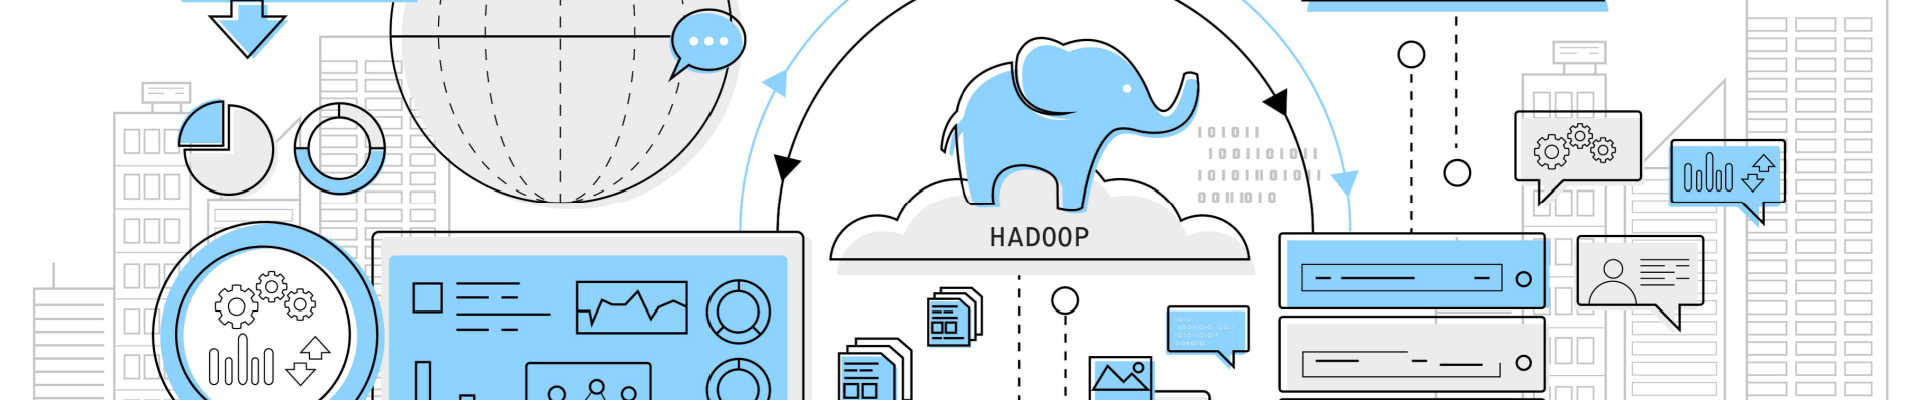 Blue and grey grapich depicting Hadoop and other technologies